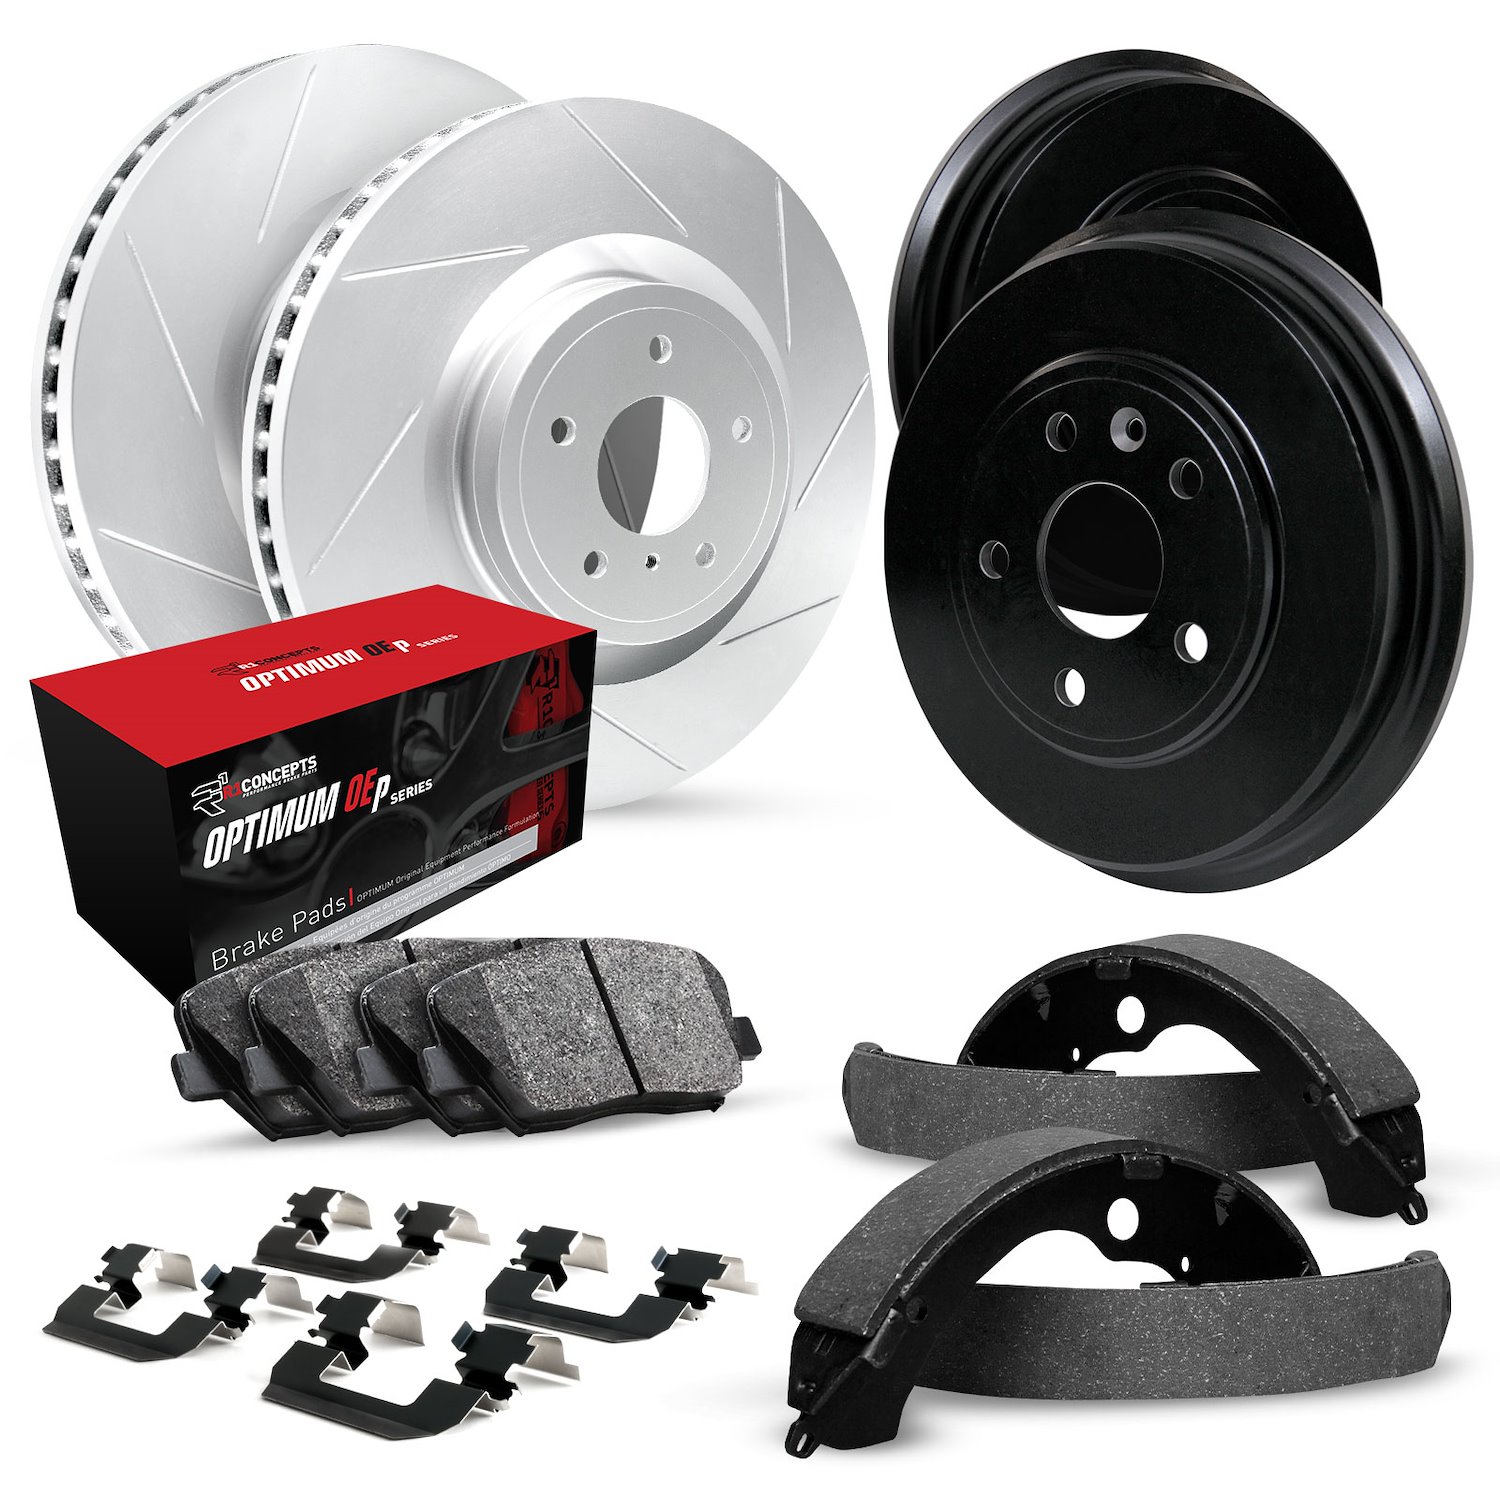 GEO-Carbon Slotted Brake Rotor & Drum Set w/Optimum OE Pads, Shoes, & Hardware, 1971-1974 GM, Position: Front & Rear